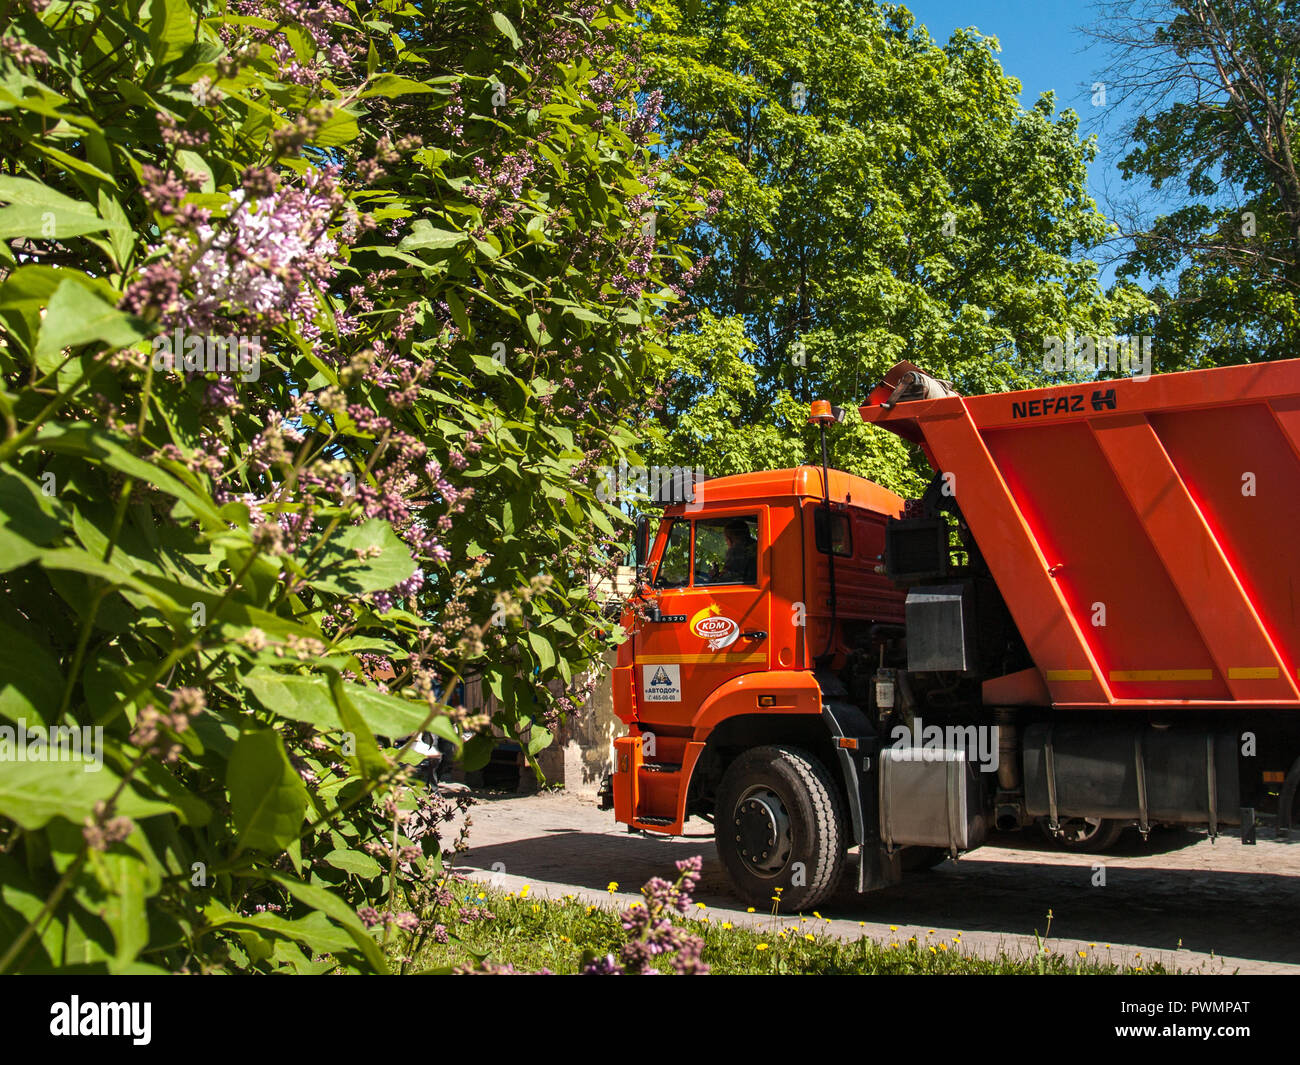 KAMAZ truck of orange color among green trees in the summer of 2018 in the city of St. Petersburg Stock Photo